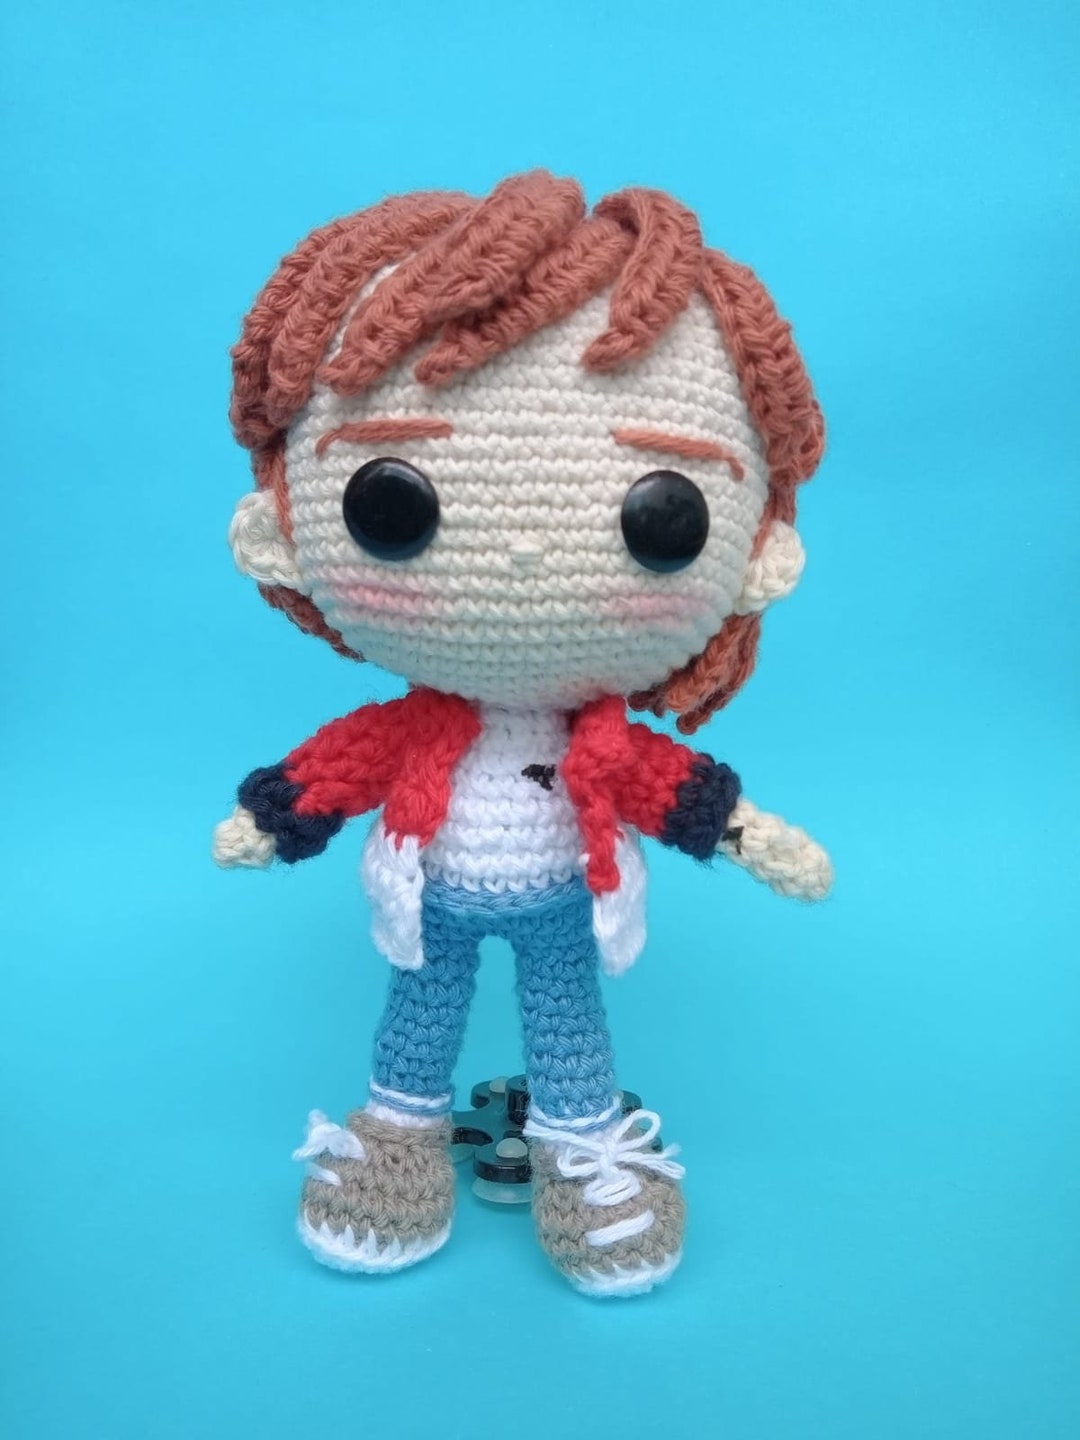 Buy Louis Tomlinson Crochet Doll With Jacket Online in India 